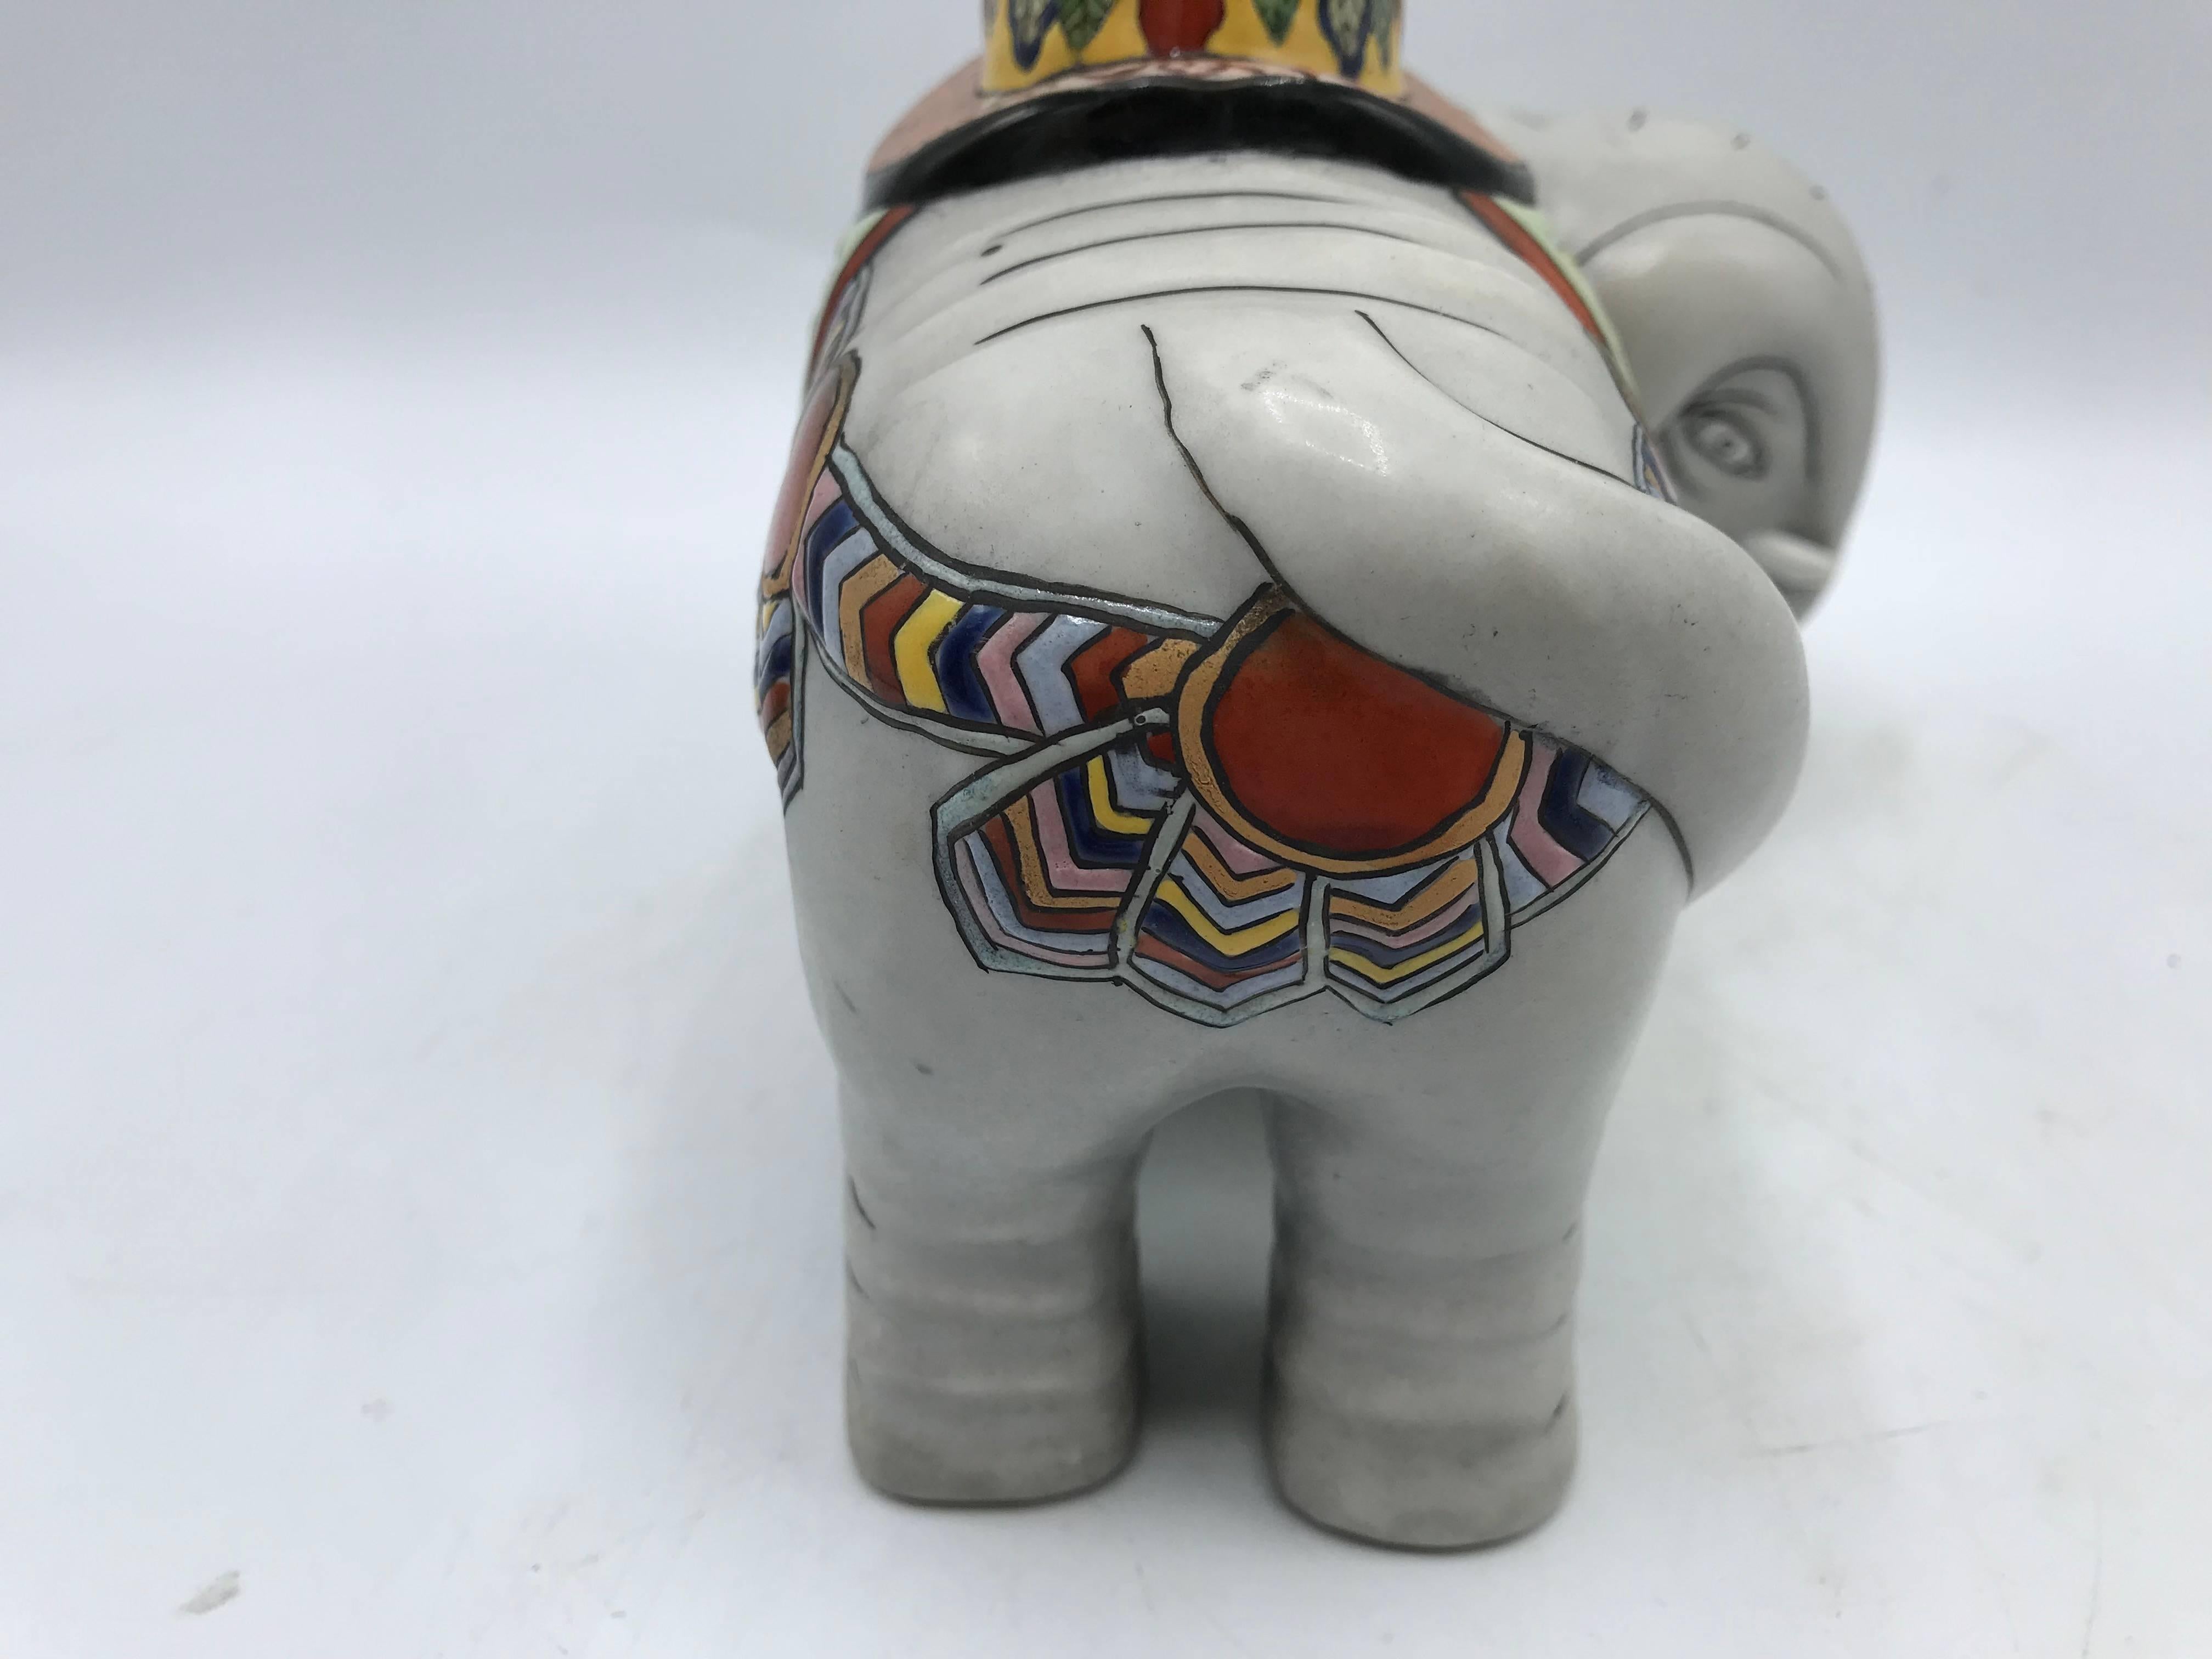 1960s Polychrome Ceramic Elephant Sculpture Candlestick Holders, Pair For Sale 2